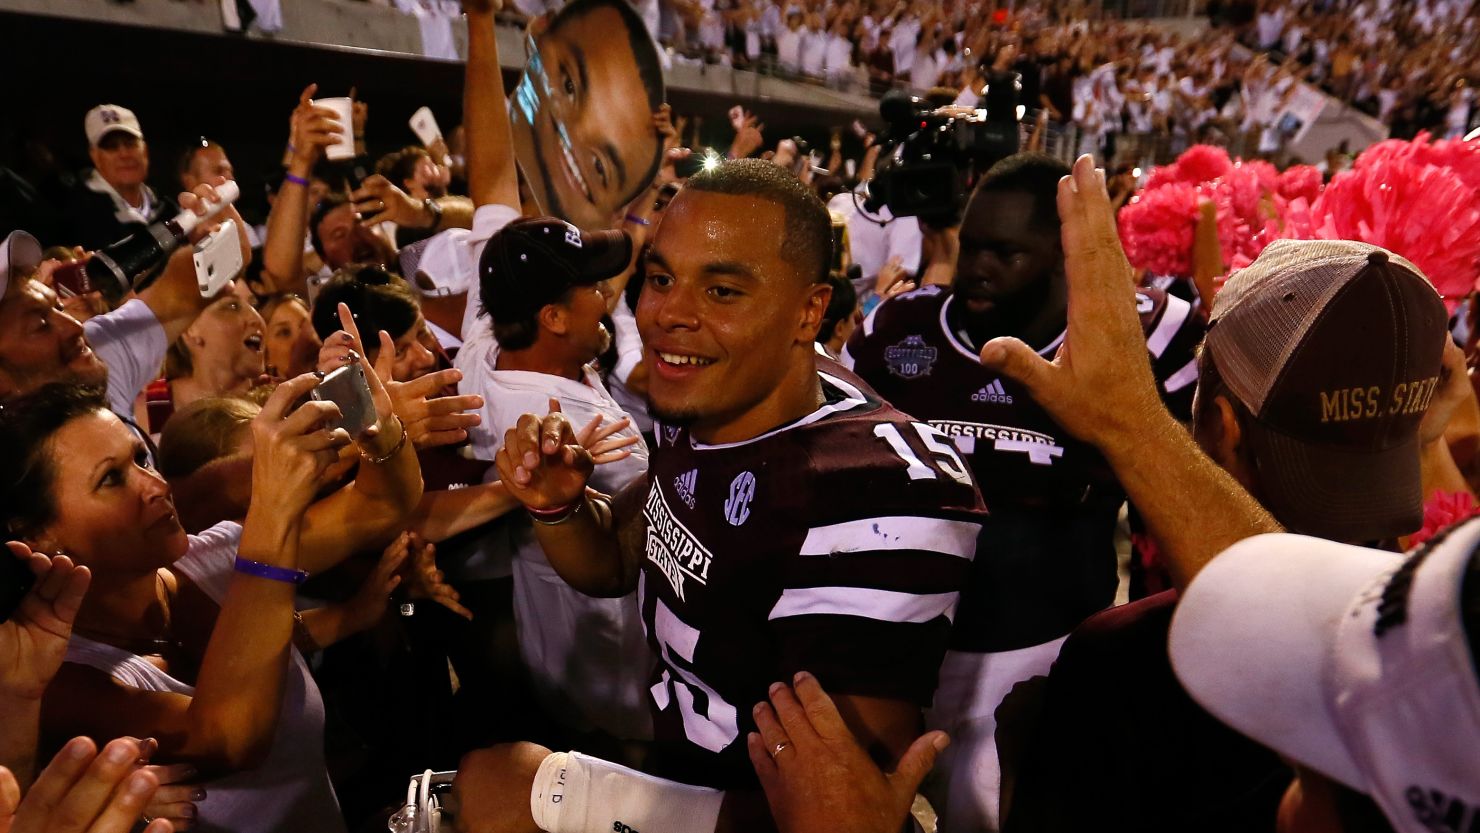 Dak Prescott of the Mississippi State Bulldogs celebrates with fans after their 38-23 win over the Auburn Tigers on October 11. 